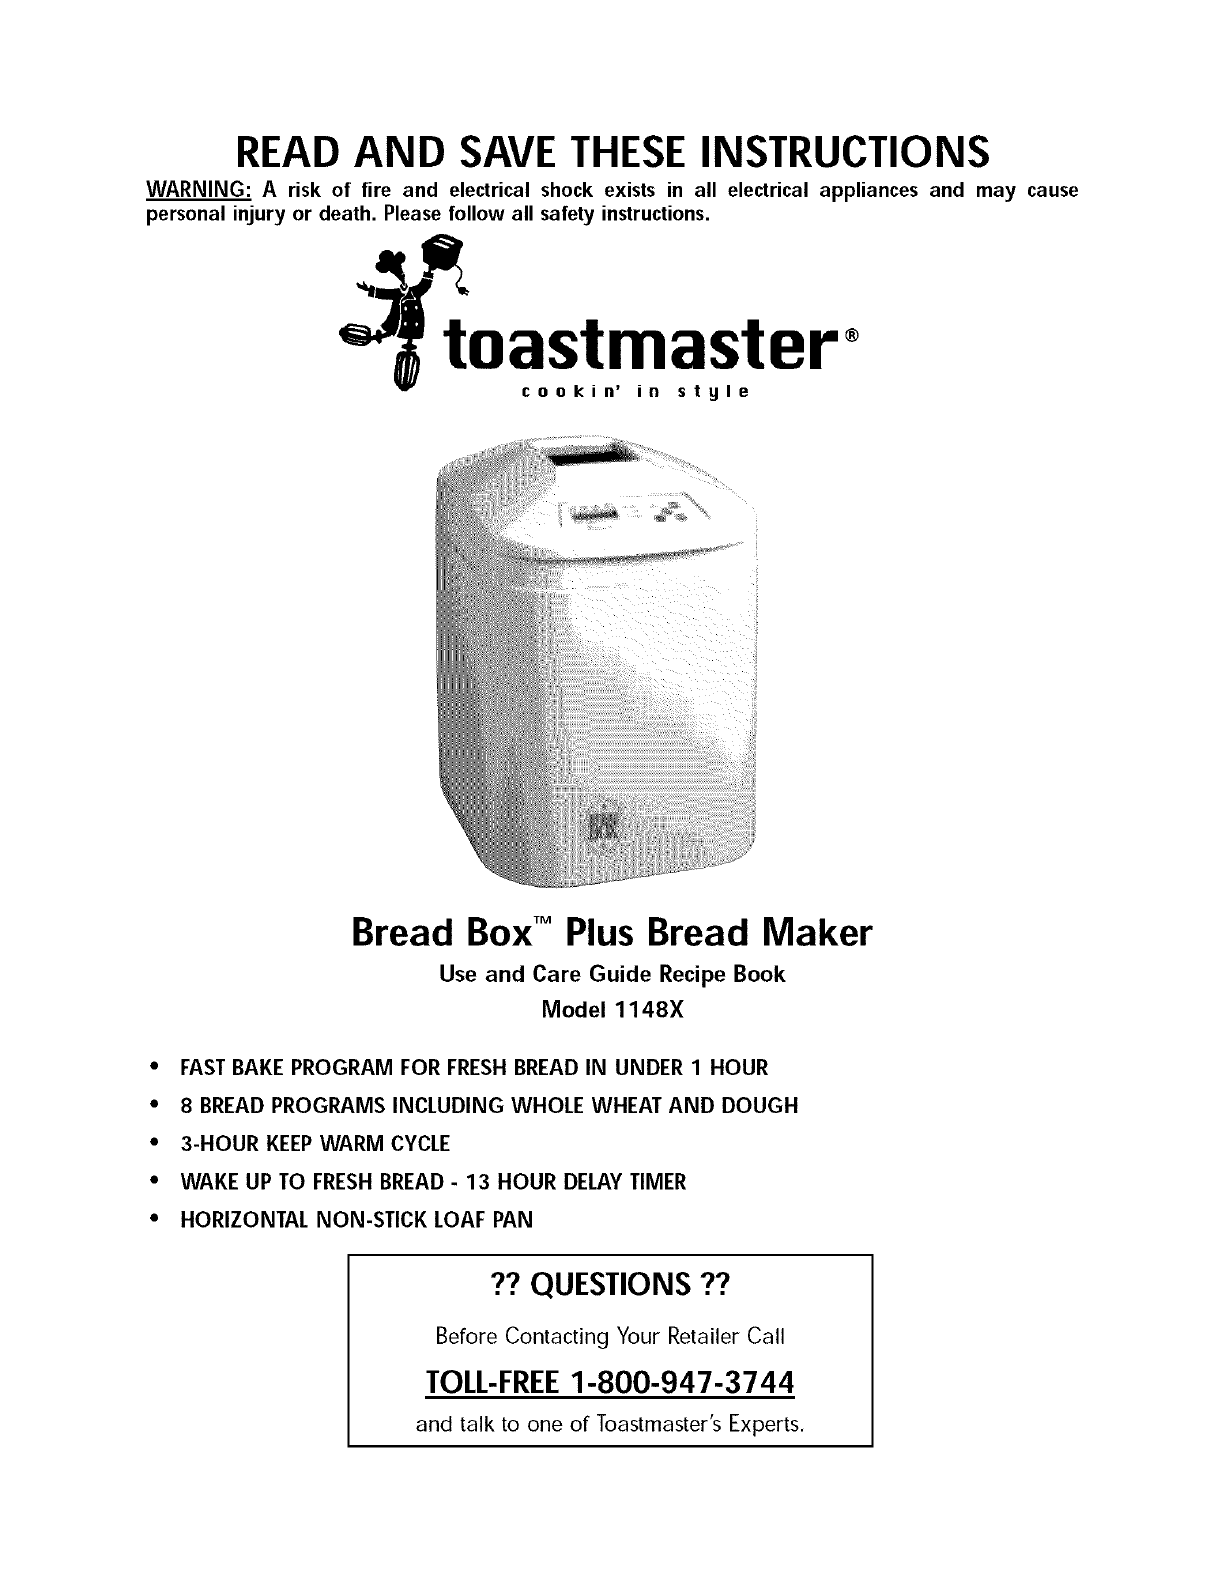 Toastmaster 1172X Use And Care Manual